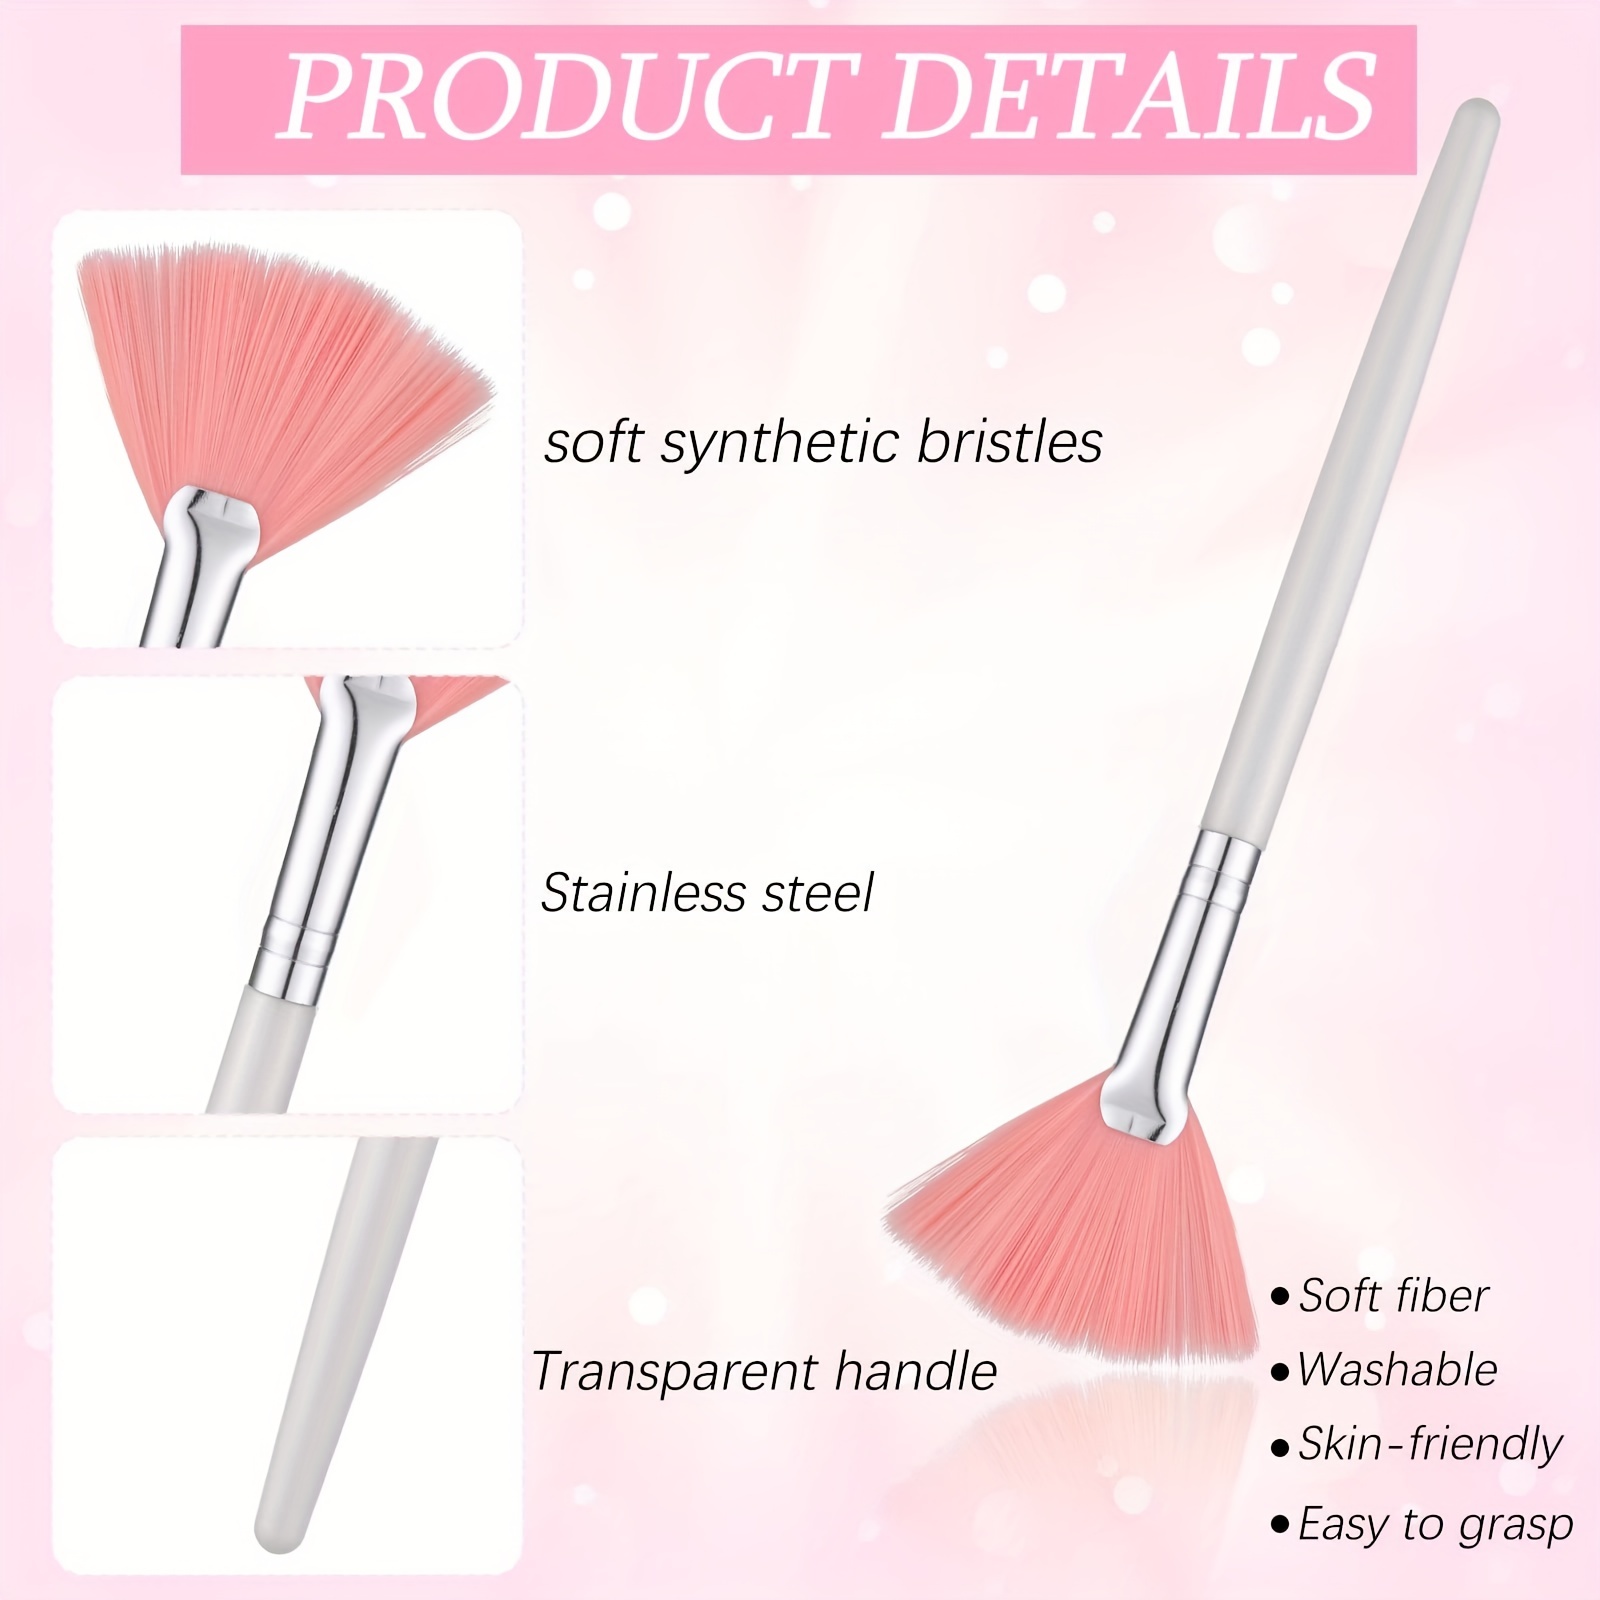 15 Pieces Fan Brushes Soft Facial Applicator Brushes Acid Applicator Brush  Cosmetic Makeup Skincare Tools for Mud Cream Pink, Yellow, White